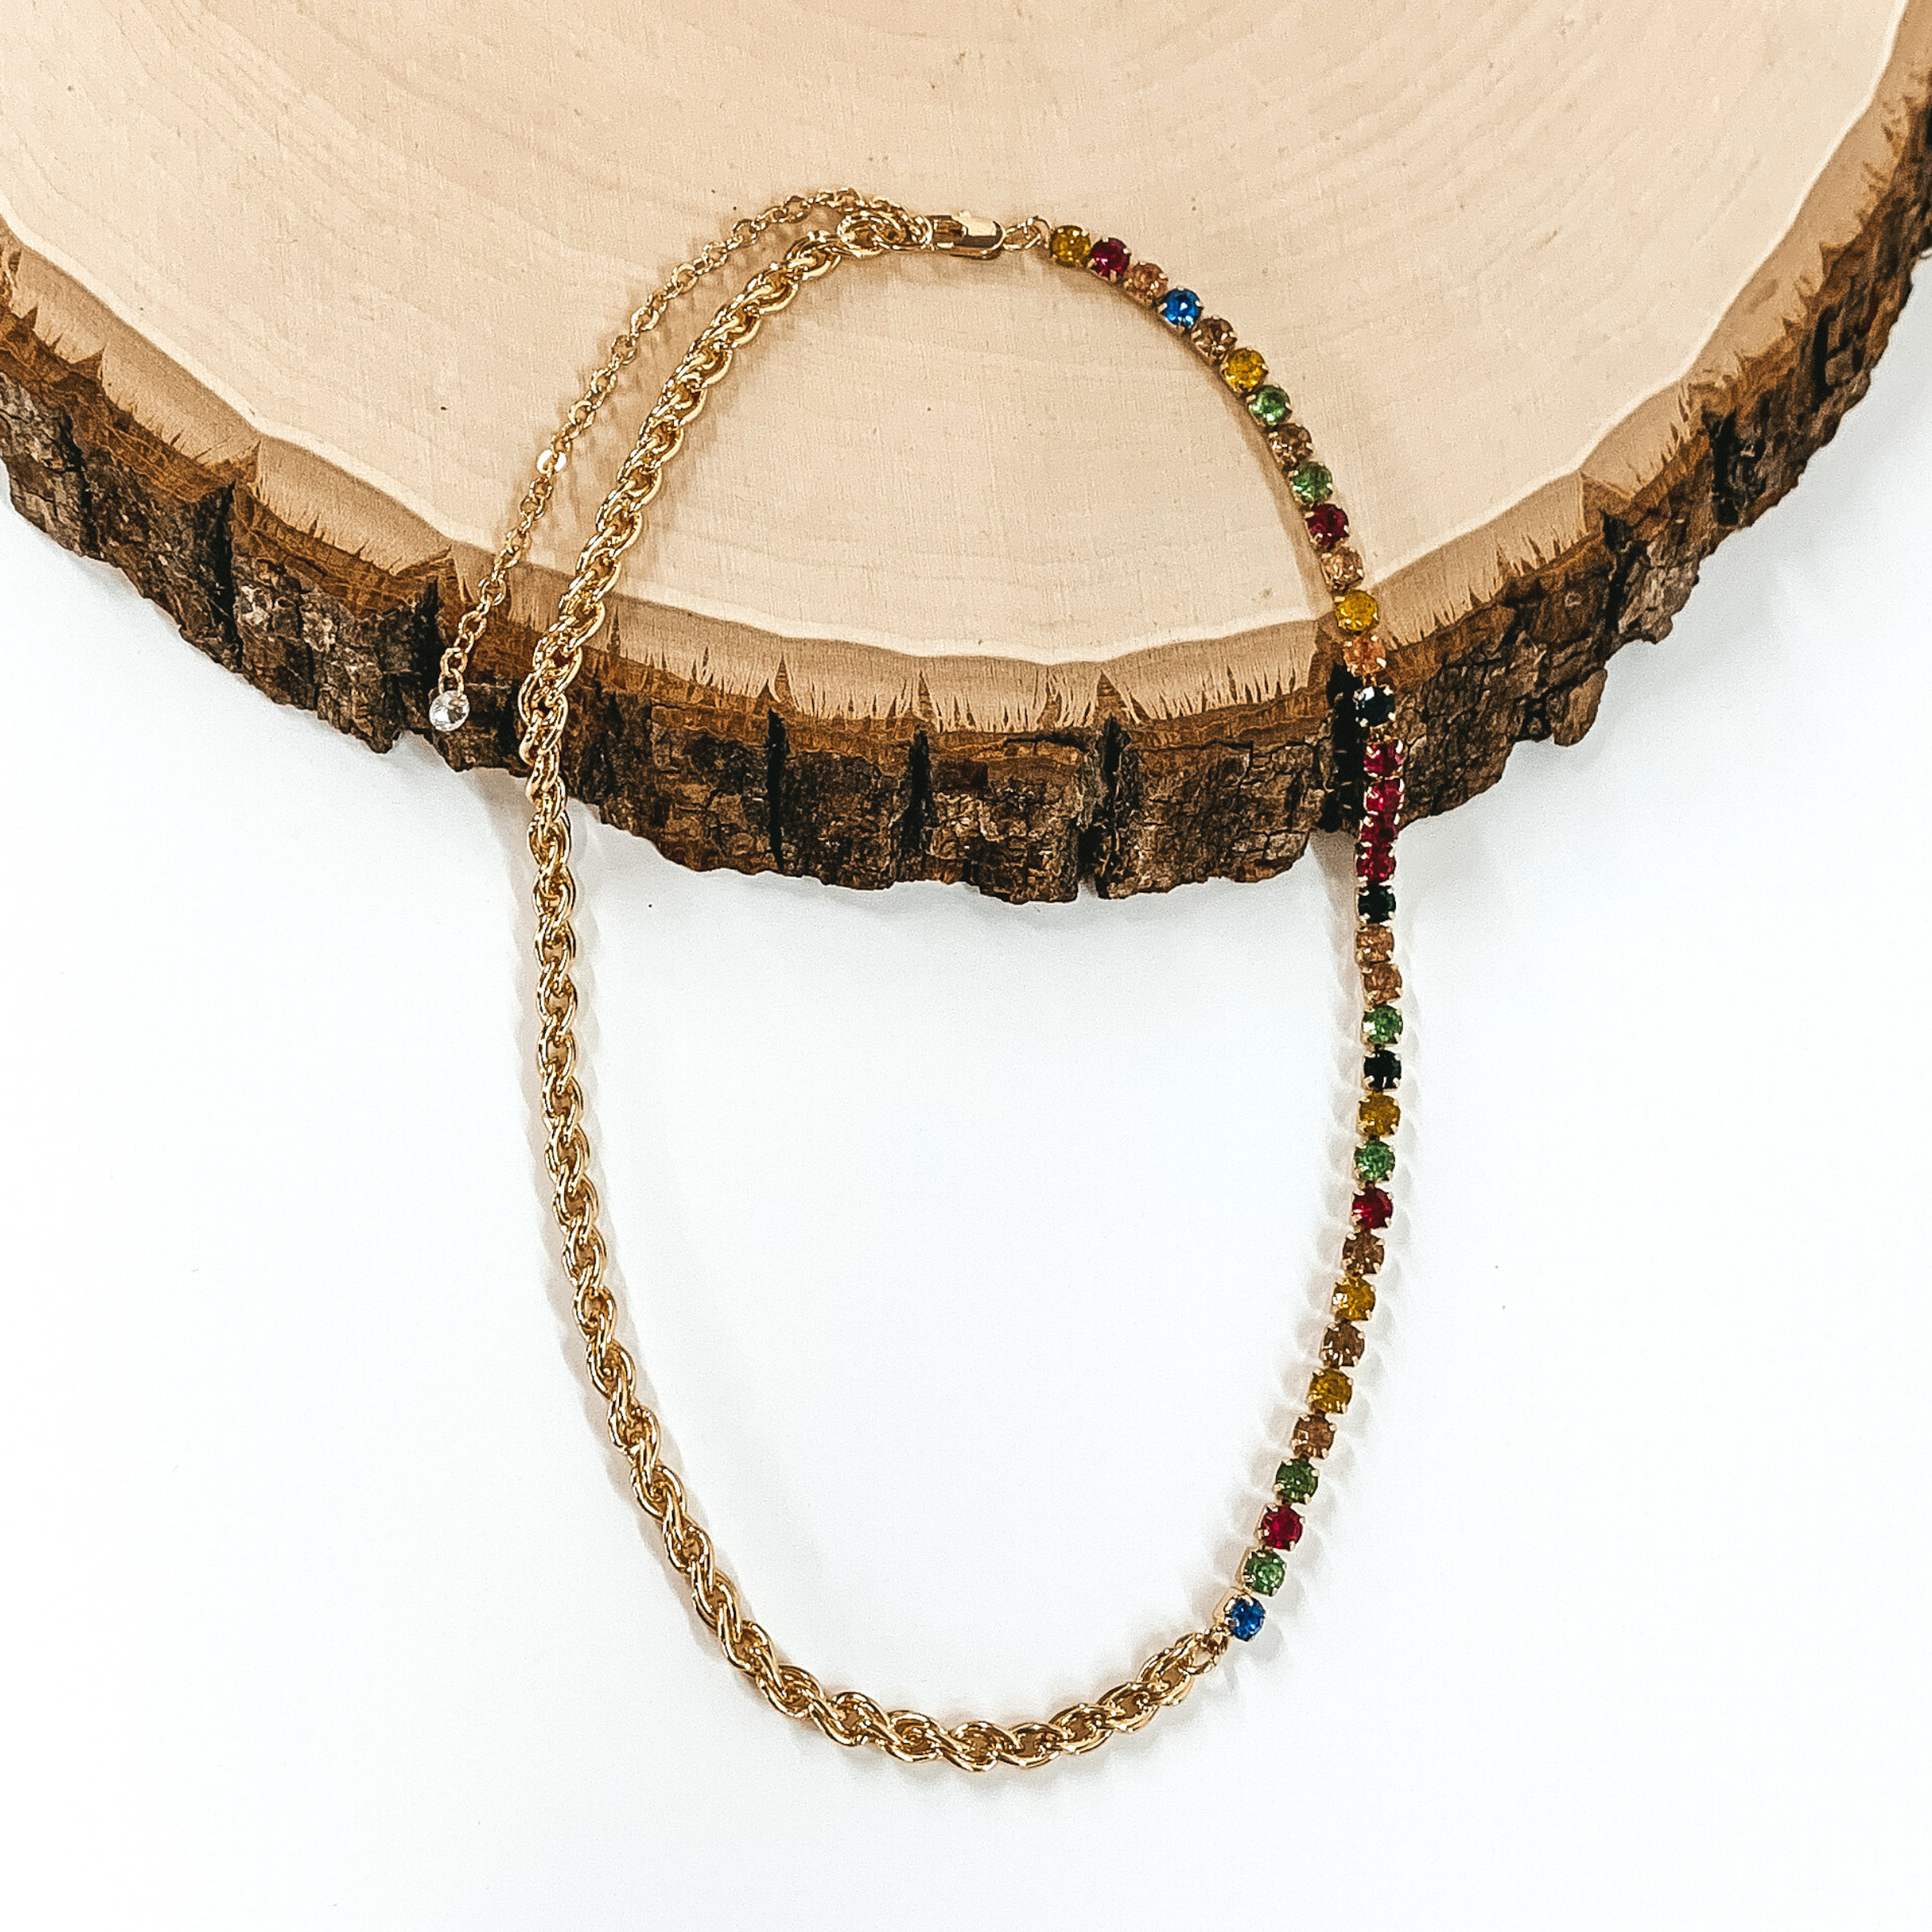 A single gold chained necklace. This necklace includes two different types of chains on the same strand. I rope strand that goes into a multicolored crystalized chain. This necklace is laying on a piece of wood and is pictured on a white background. 